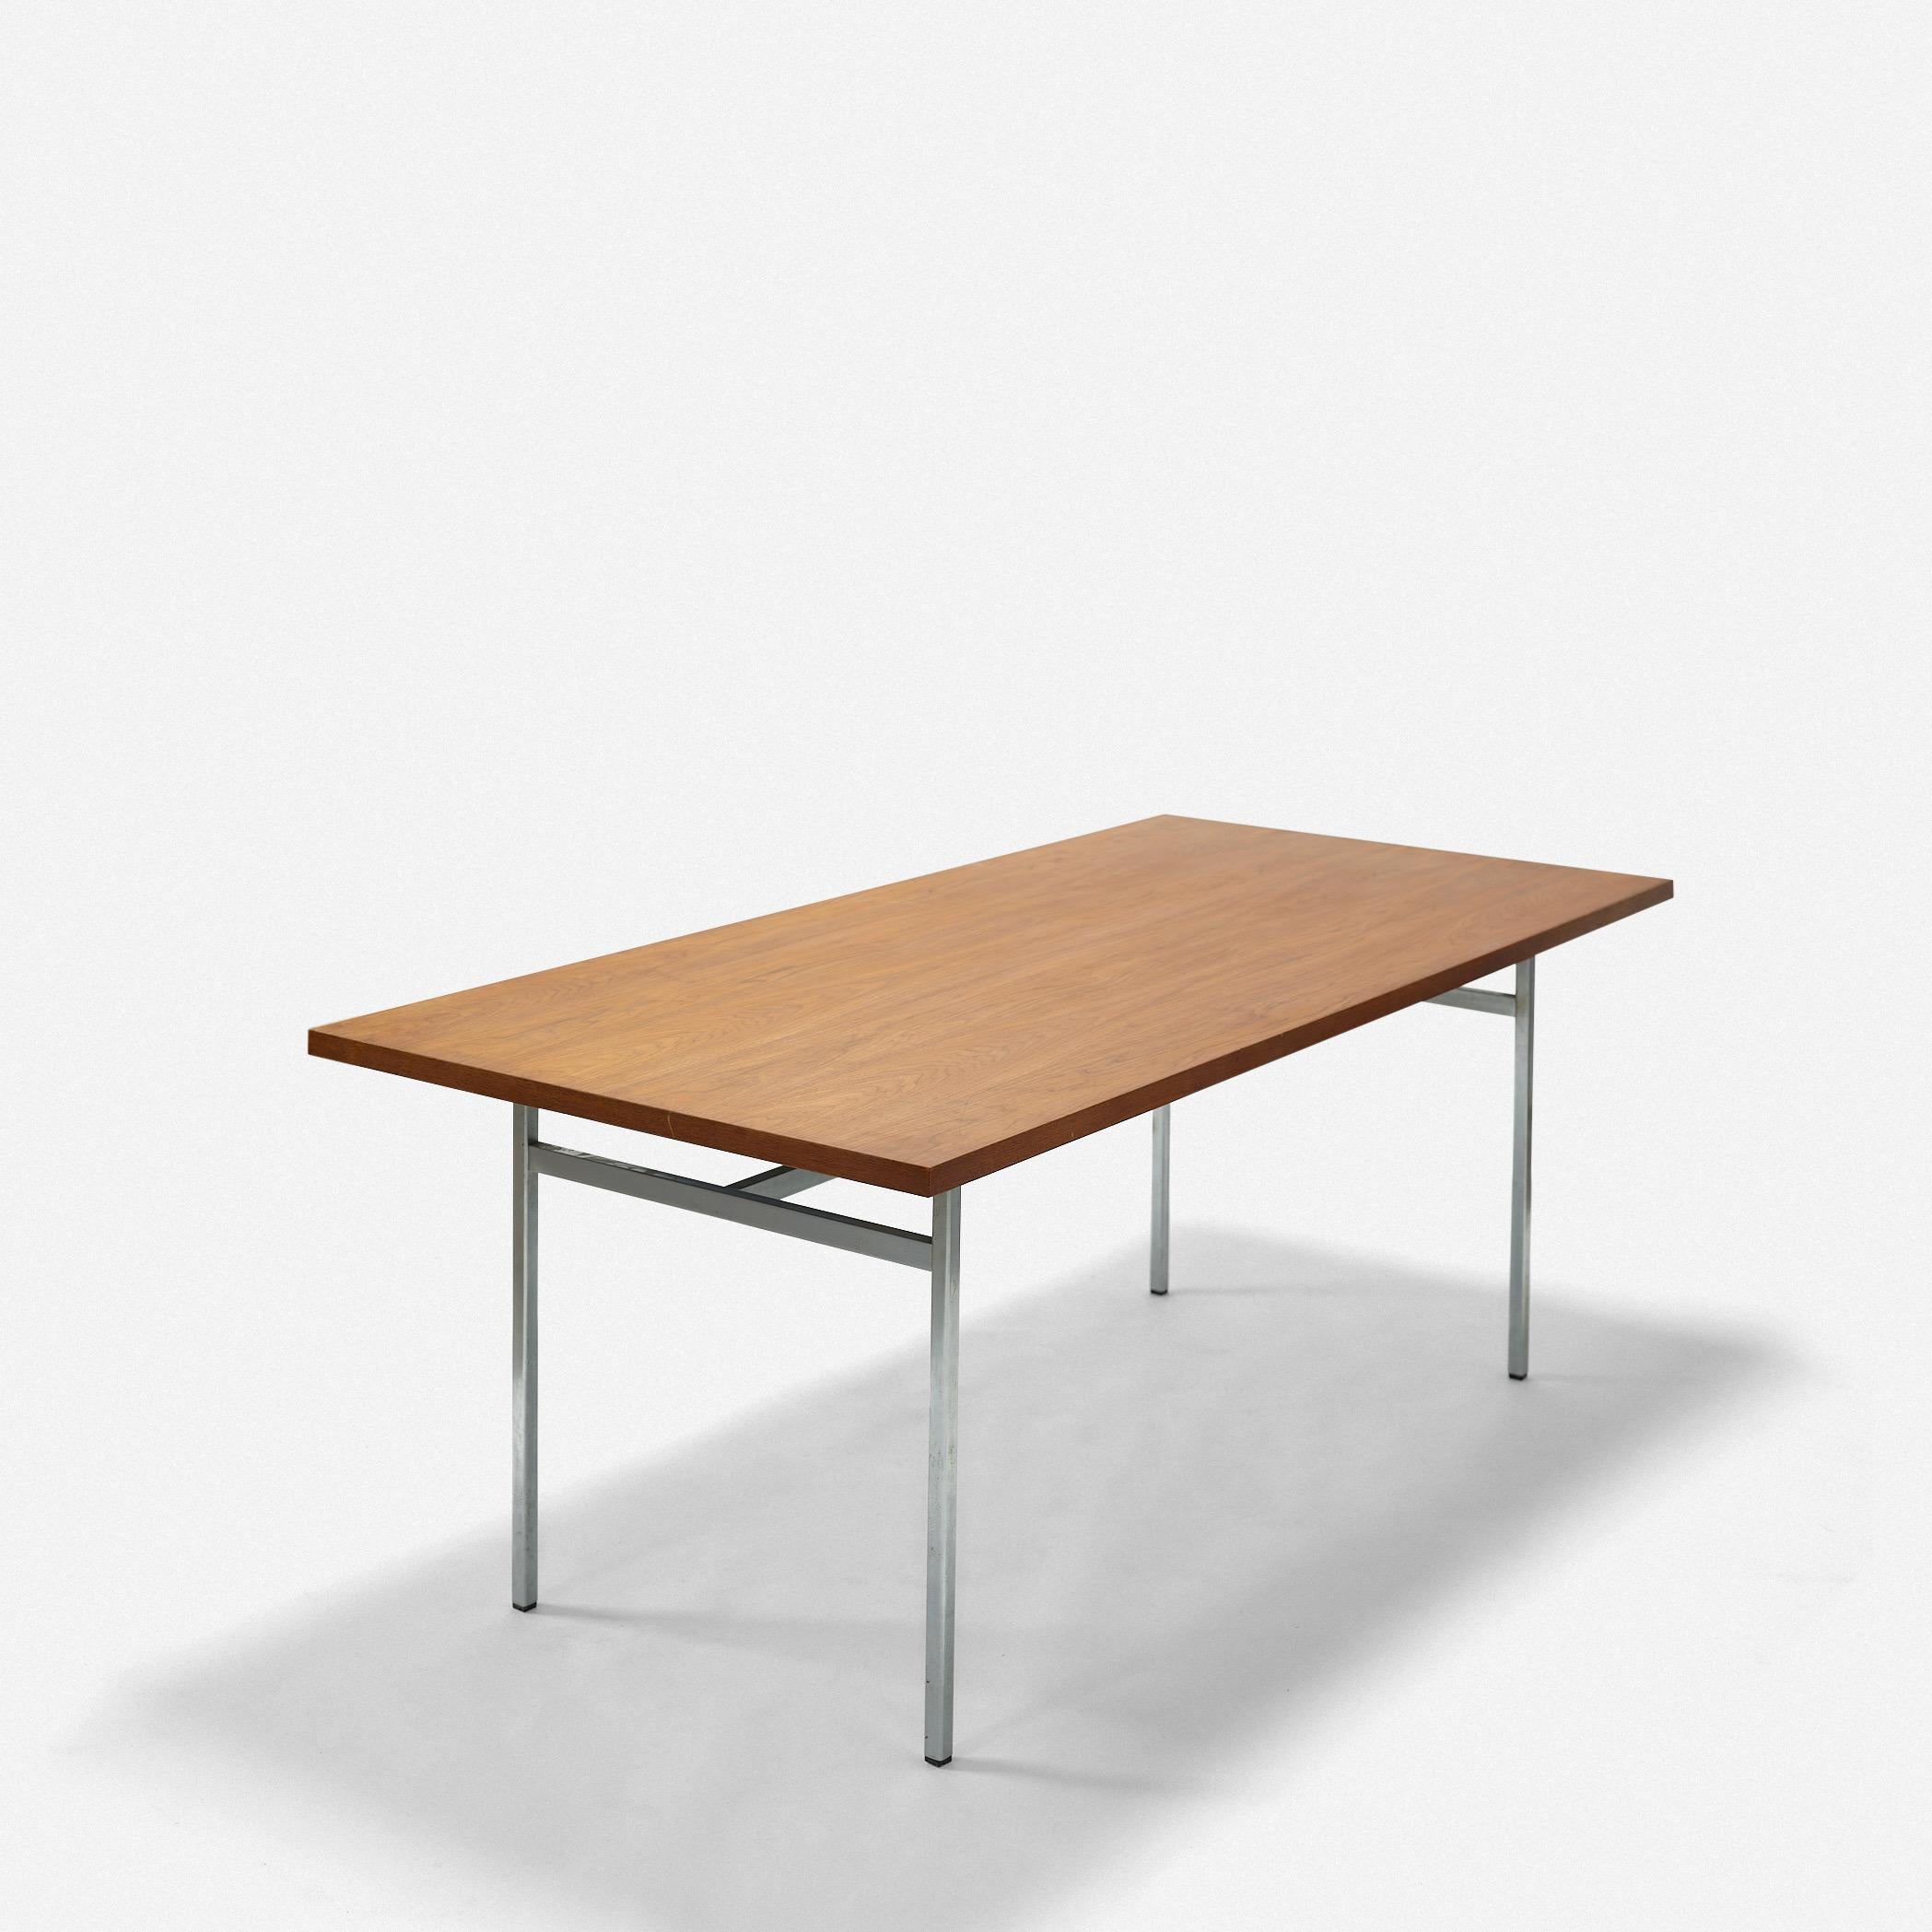 Mid-20th Century Steel and Walnut Dining Table Designed by Florence Knoll for Knoll Associates For Sale